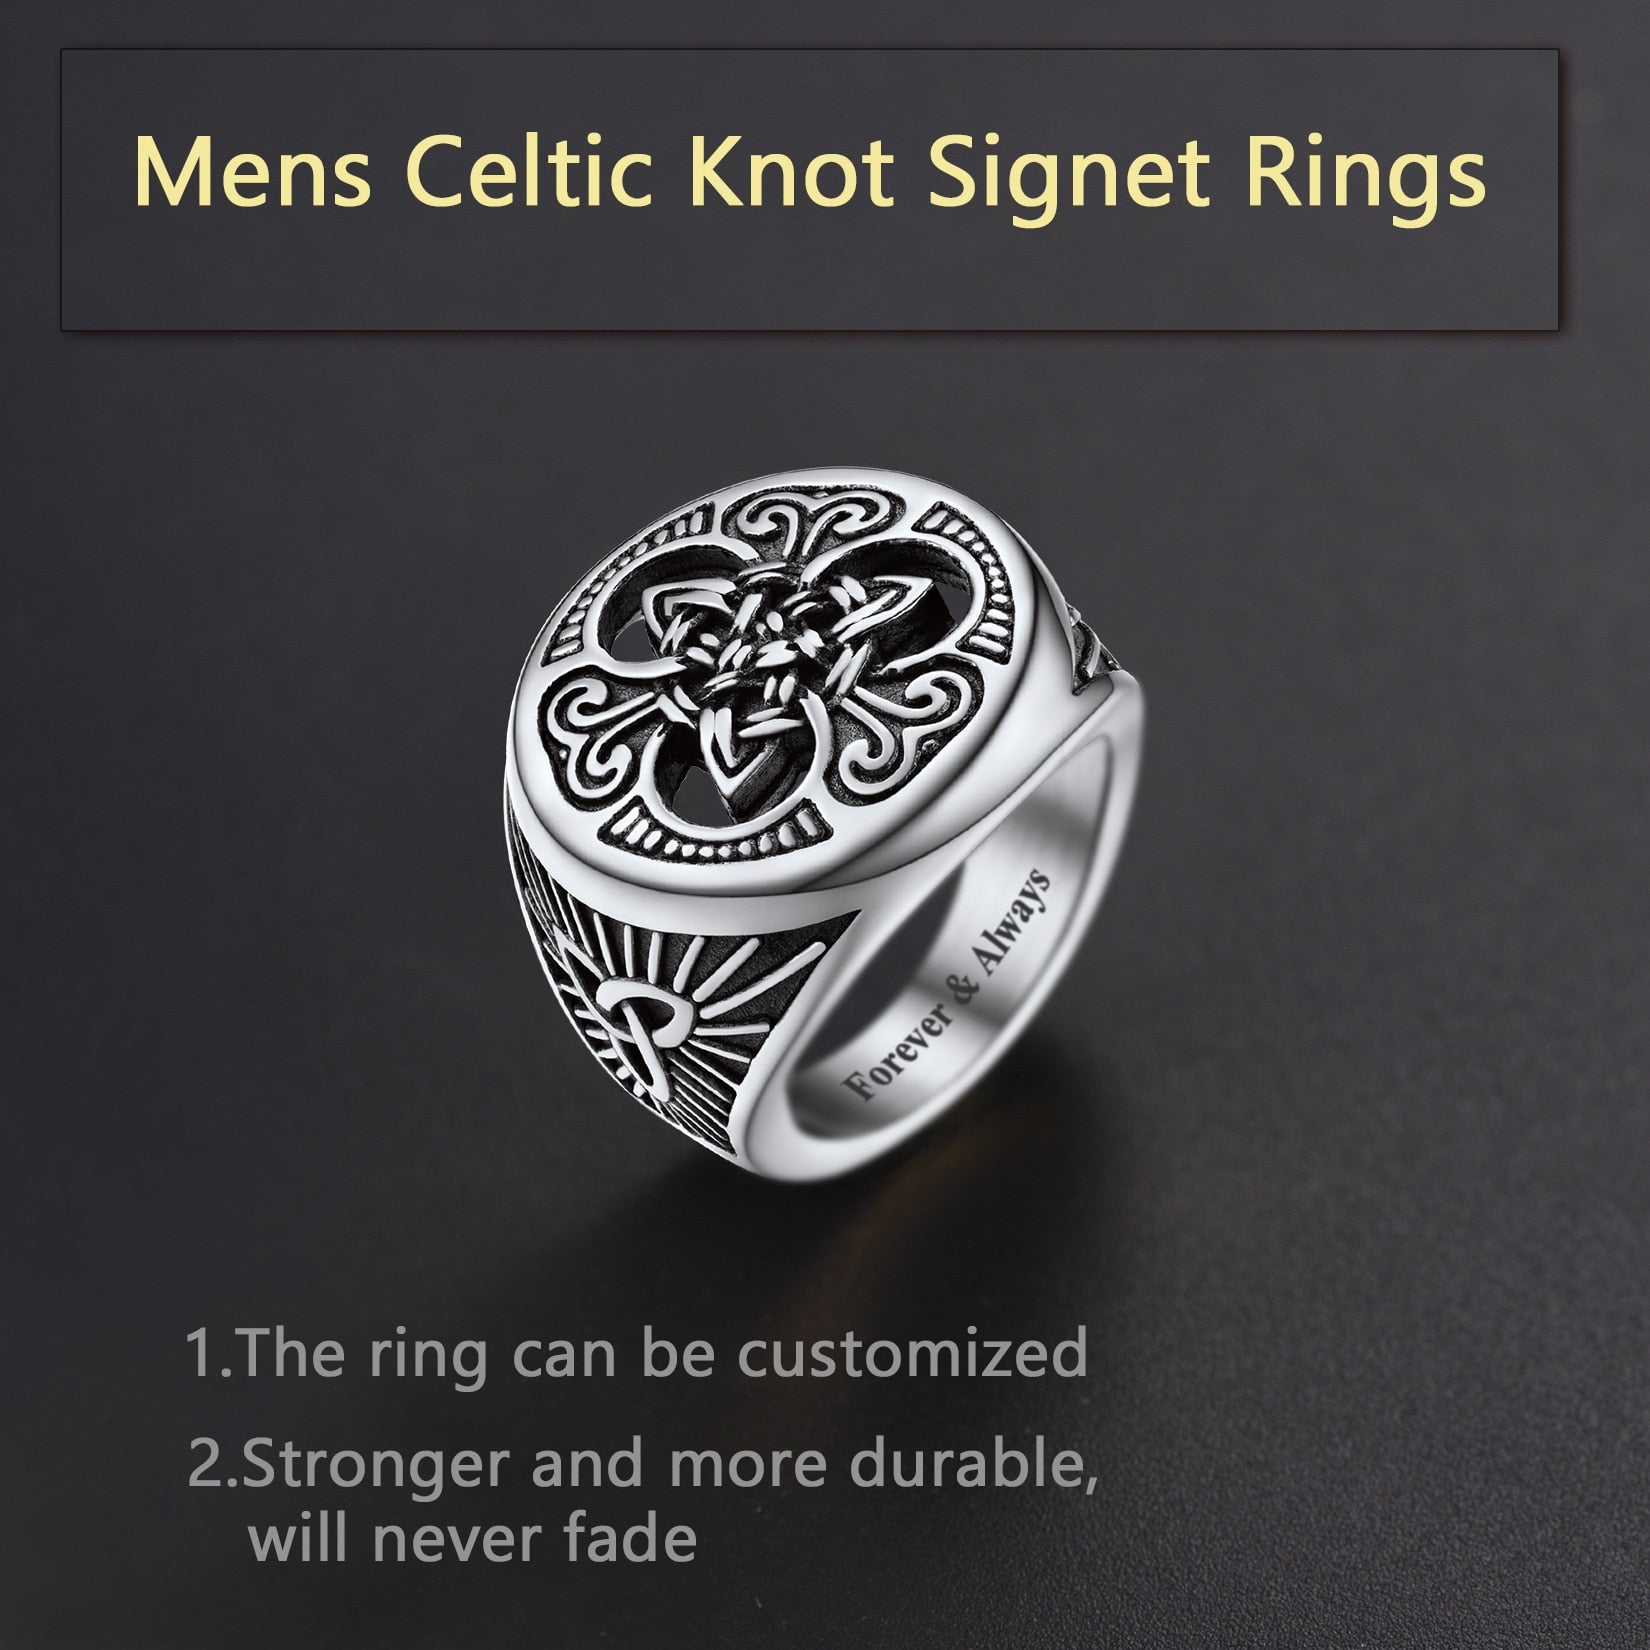 U7 Irish Celtic Knot Ring Antique Black Stainless Steel Triquetra Signet for Men Hip Hop Jewelry Size 7 to 12 R202